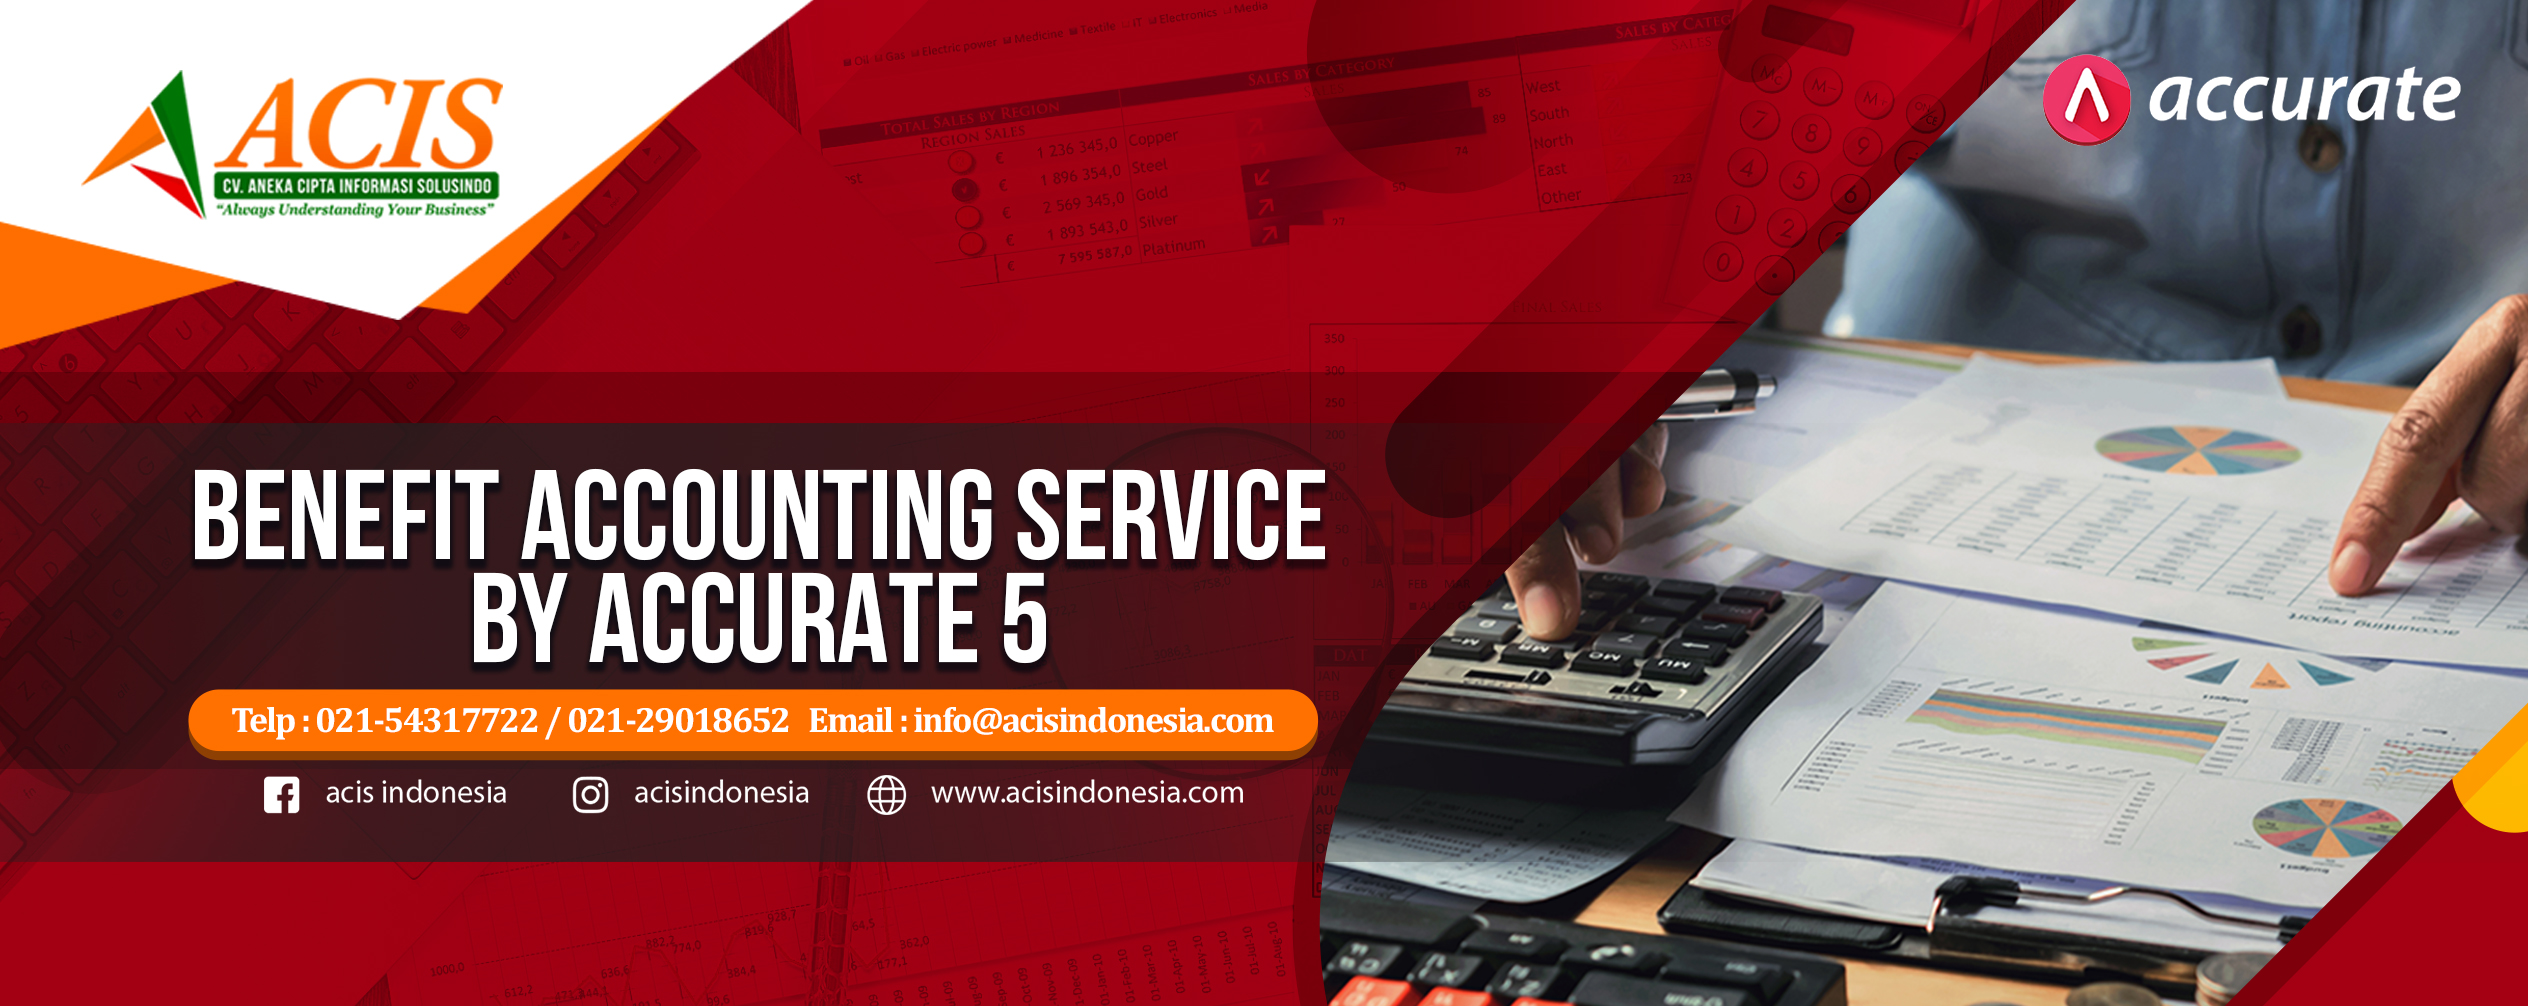 BENEFIT ACCOUNTING SERVICE by accurate 5